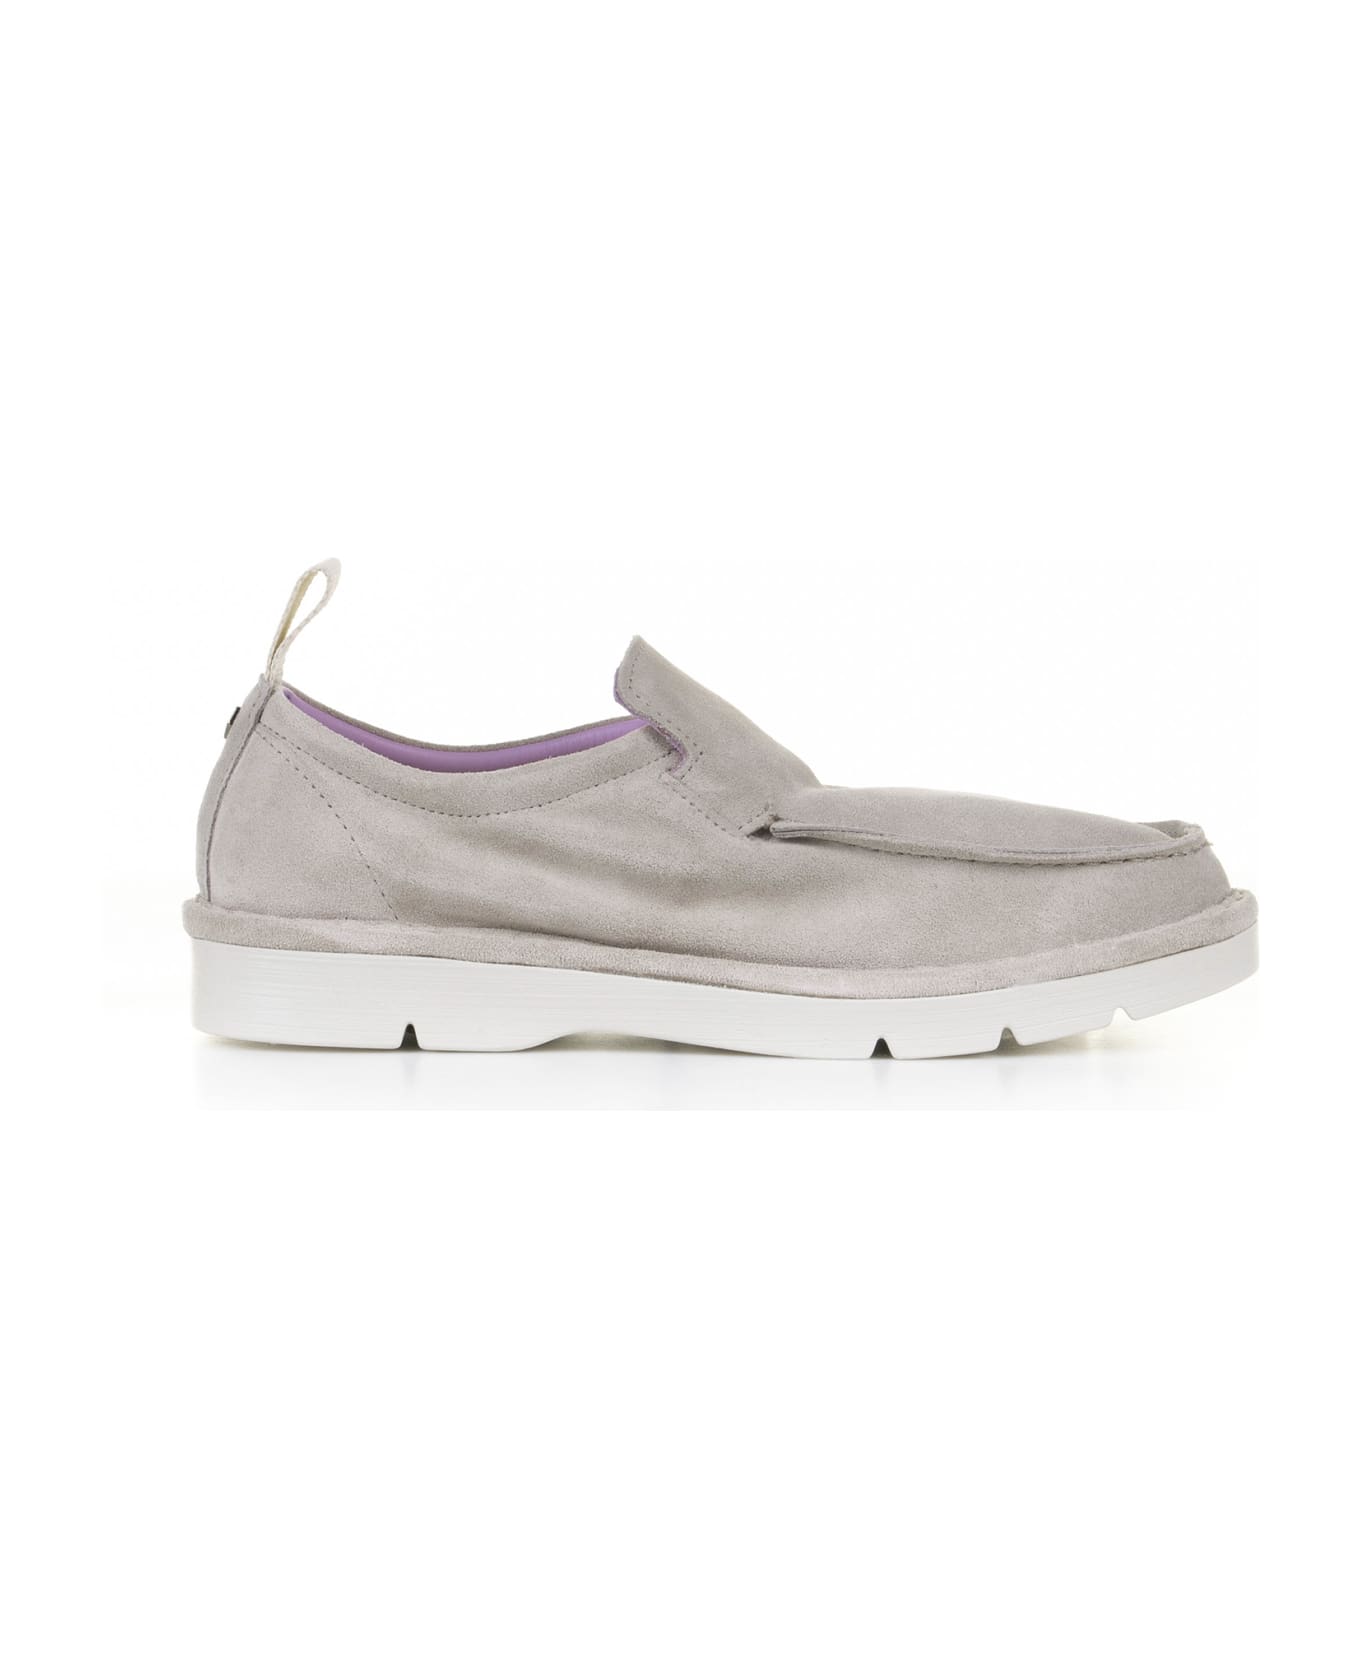 Panchic Gray Suede Moccasin - FOG フラットシューズ